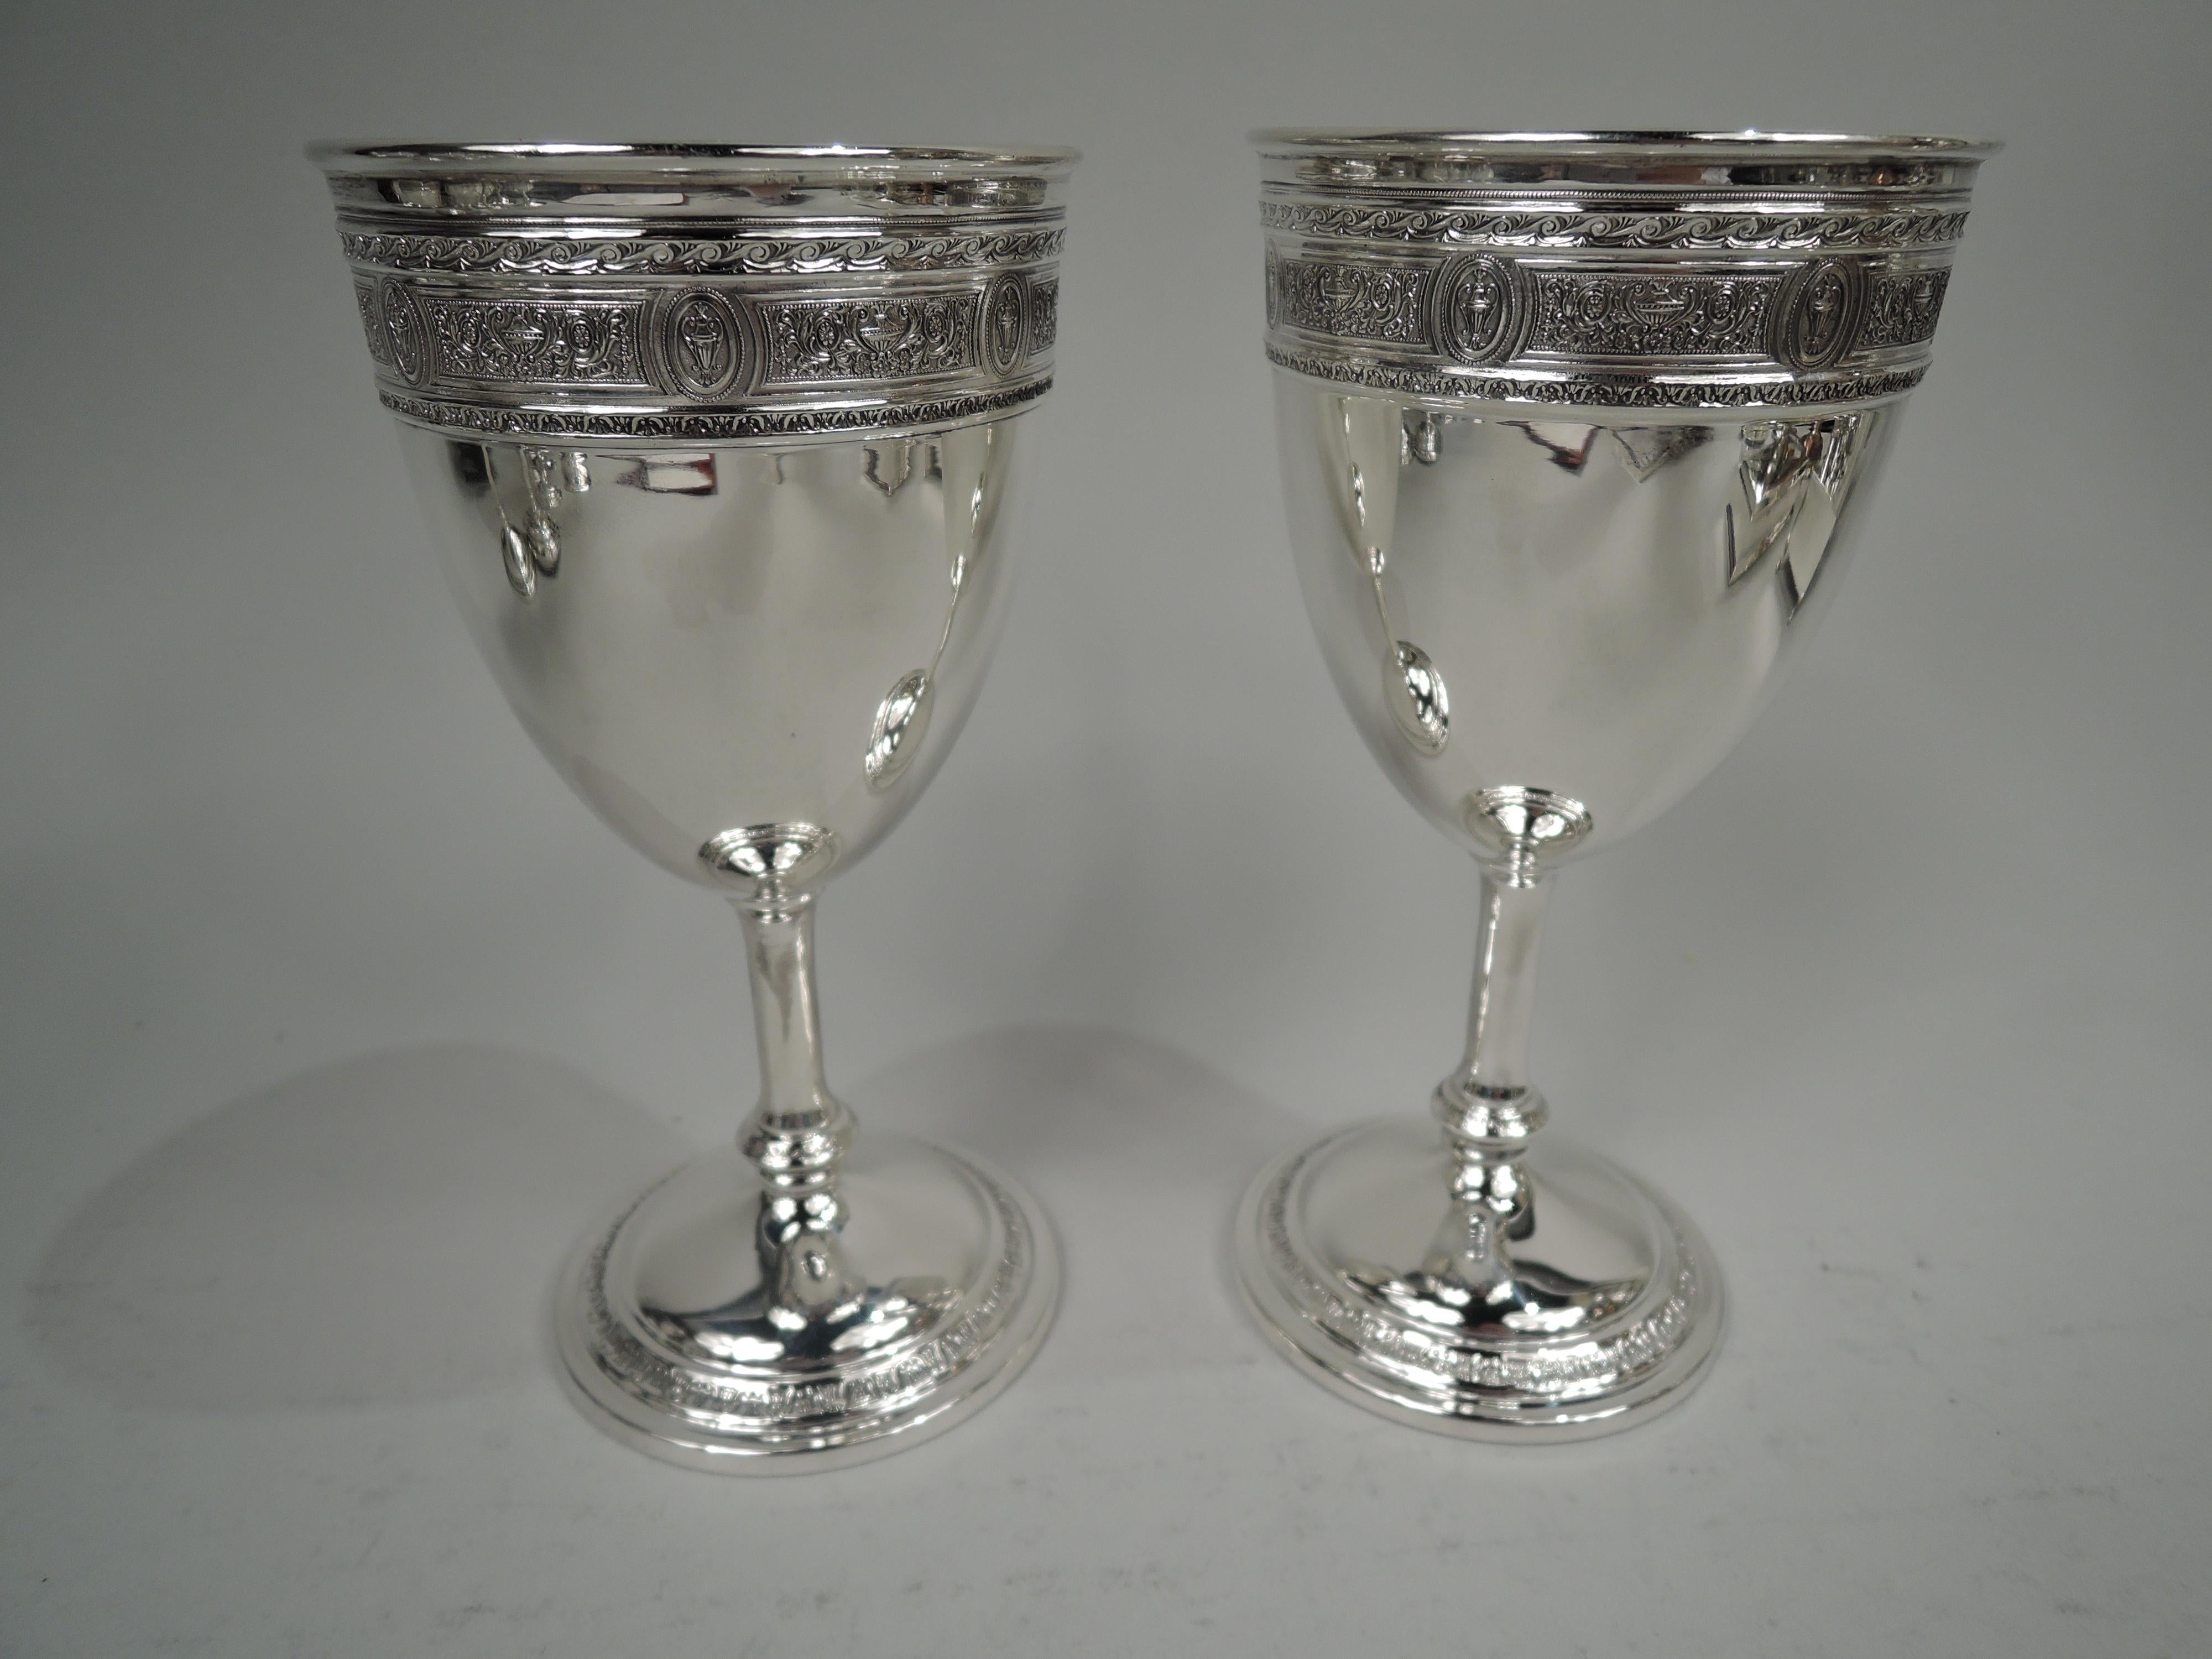 Neoclassical Revival Set of 8 International Wedgwood Sterling Silver Goblets For Sale